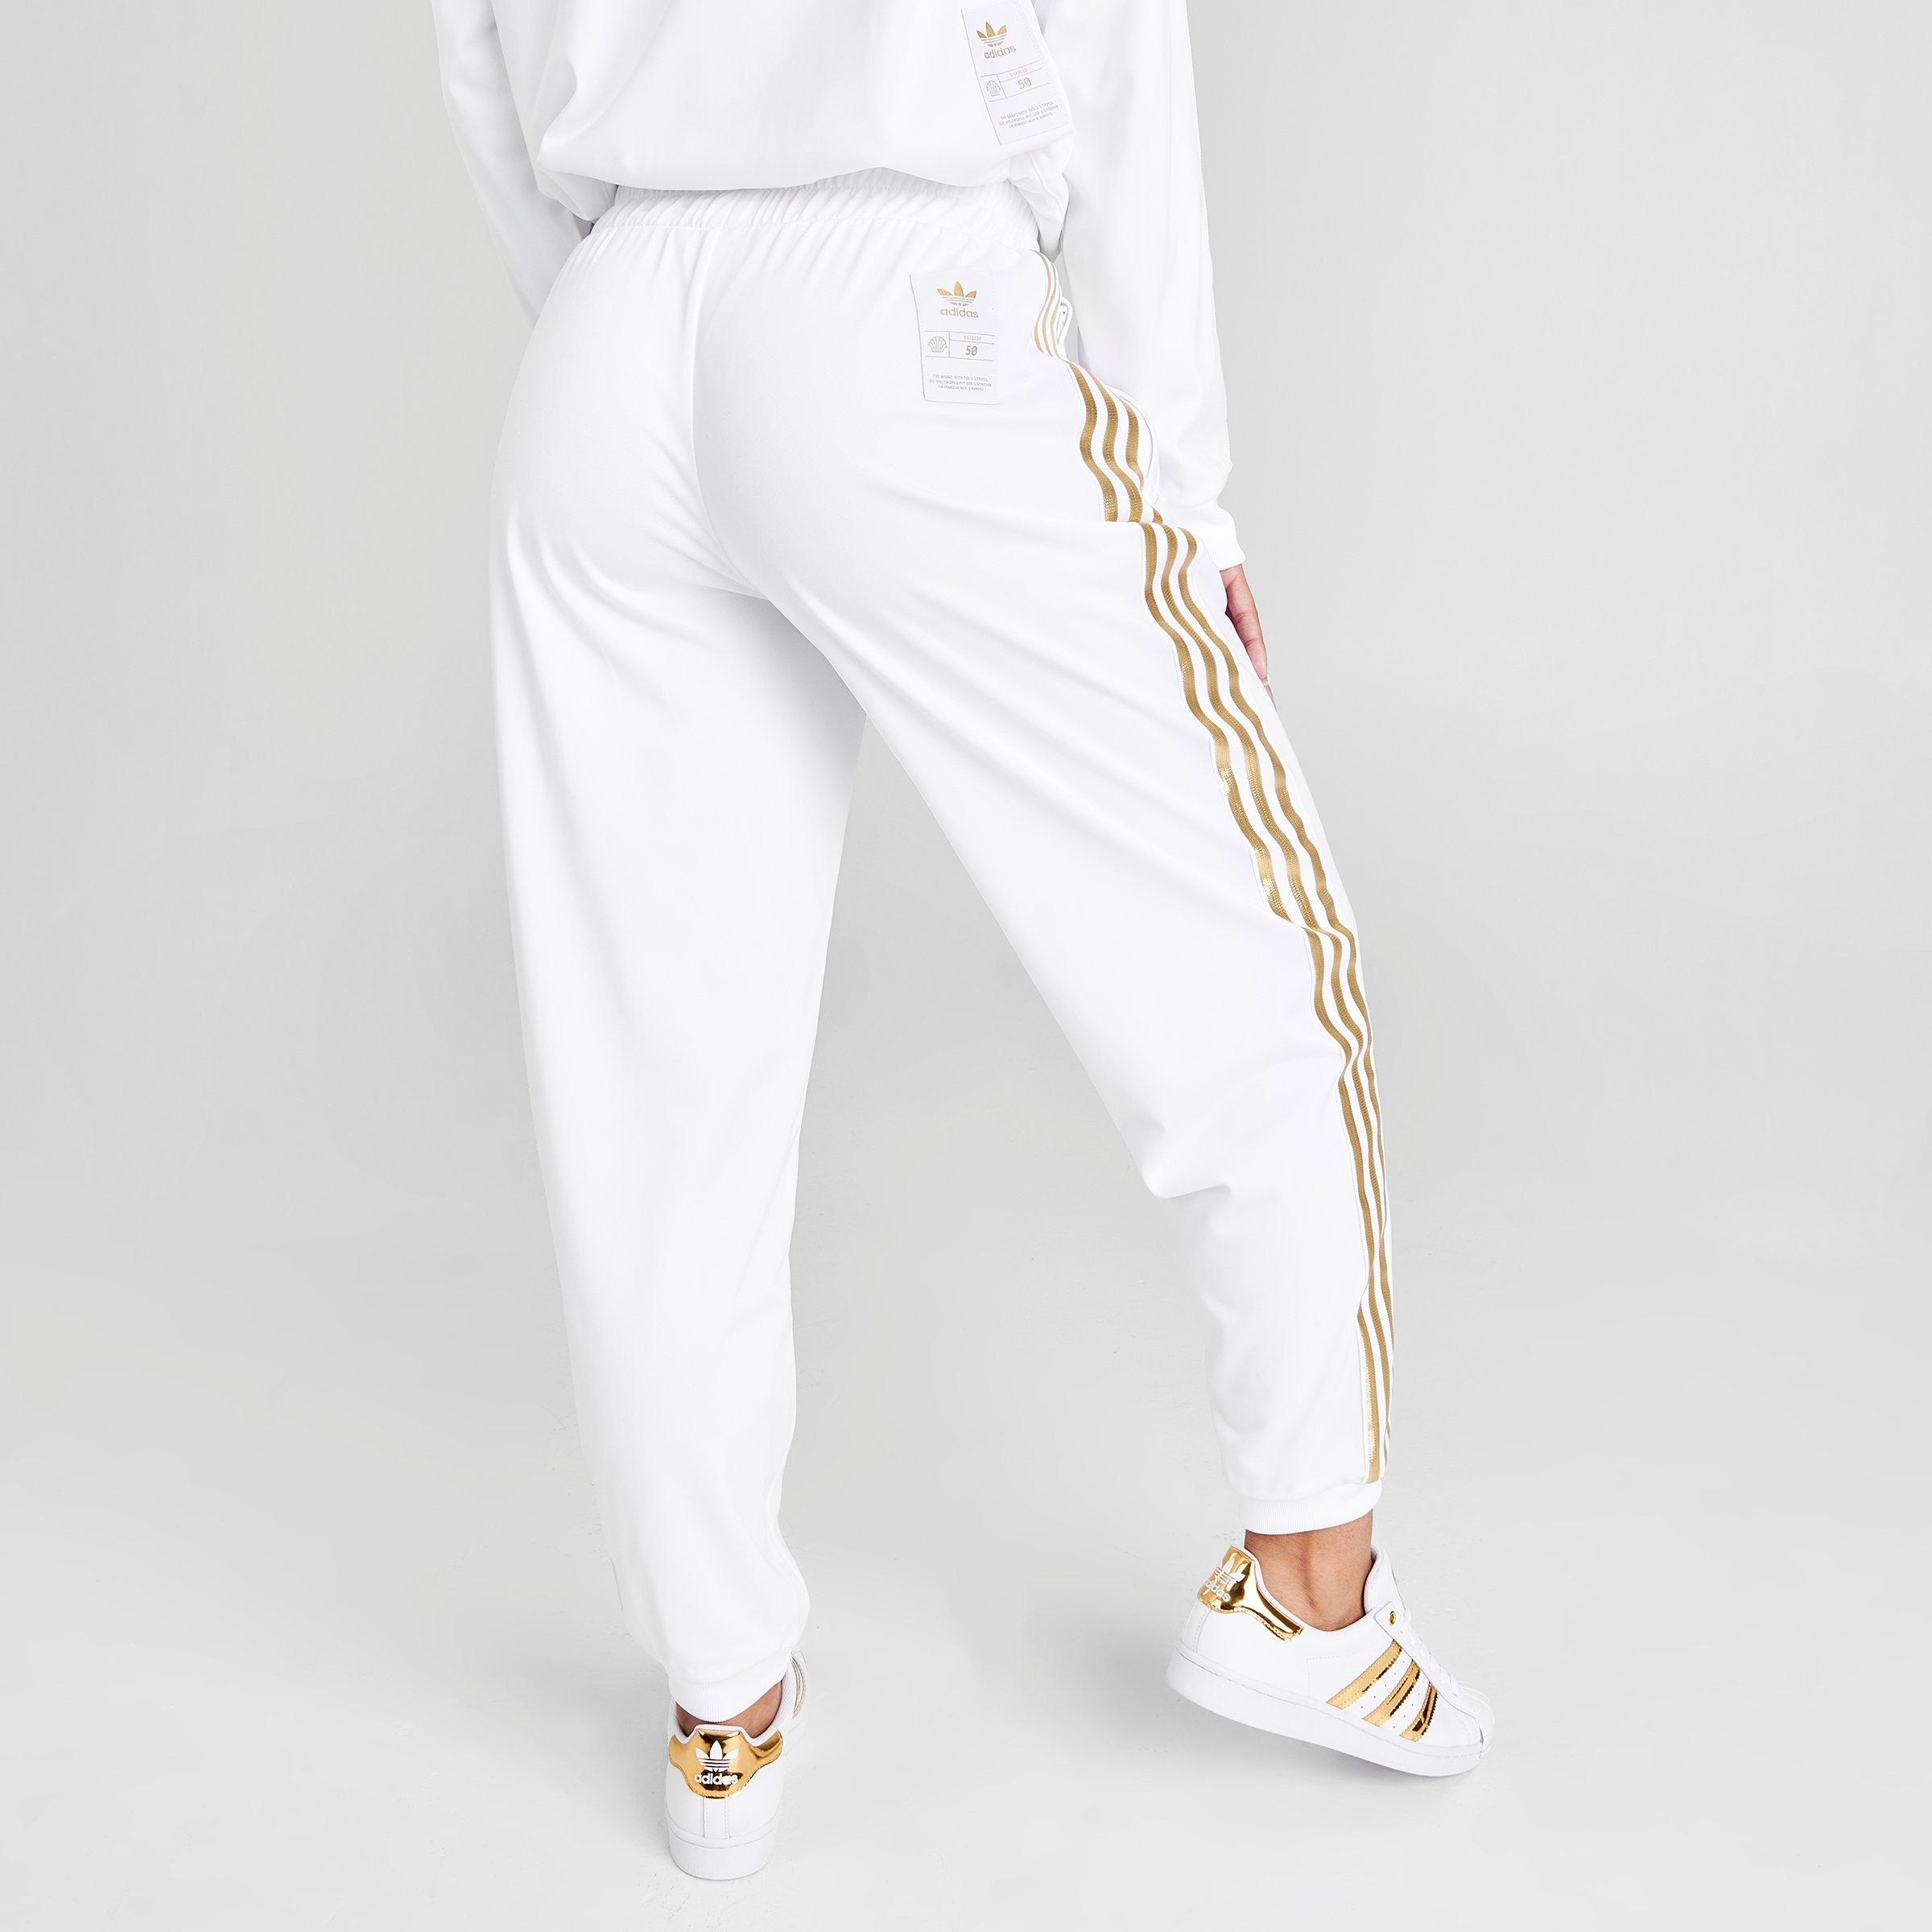 white and gold adidas sweatsuit